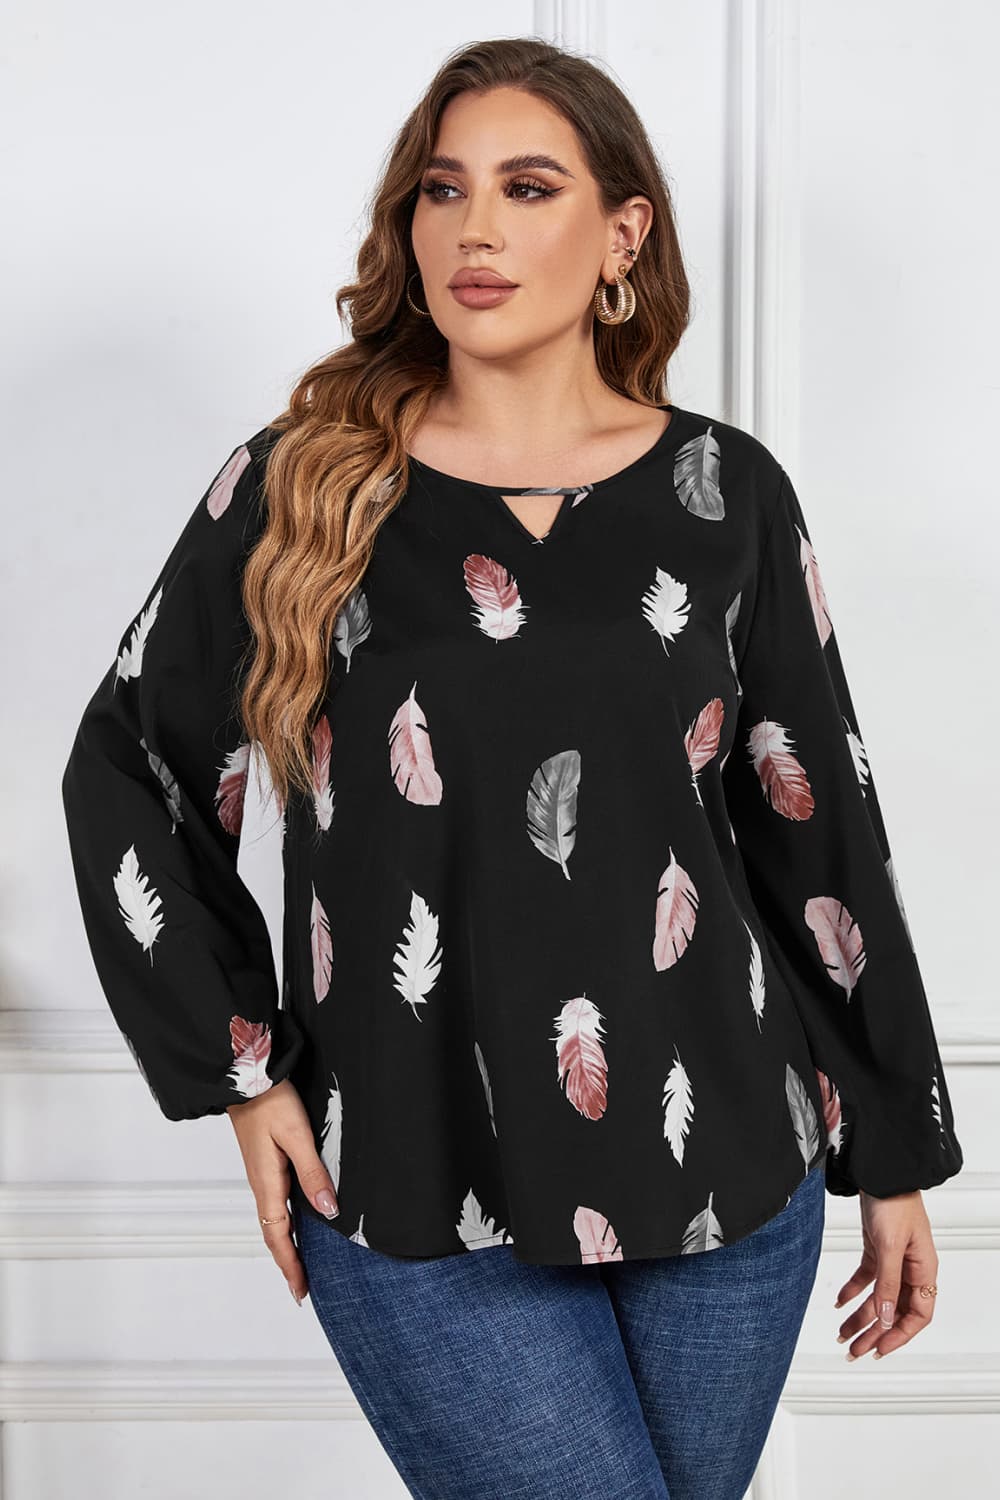 Melo Apparel Plus Size Printed Round Neck Long Sleeve Cutout Blouse